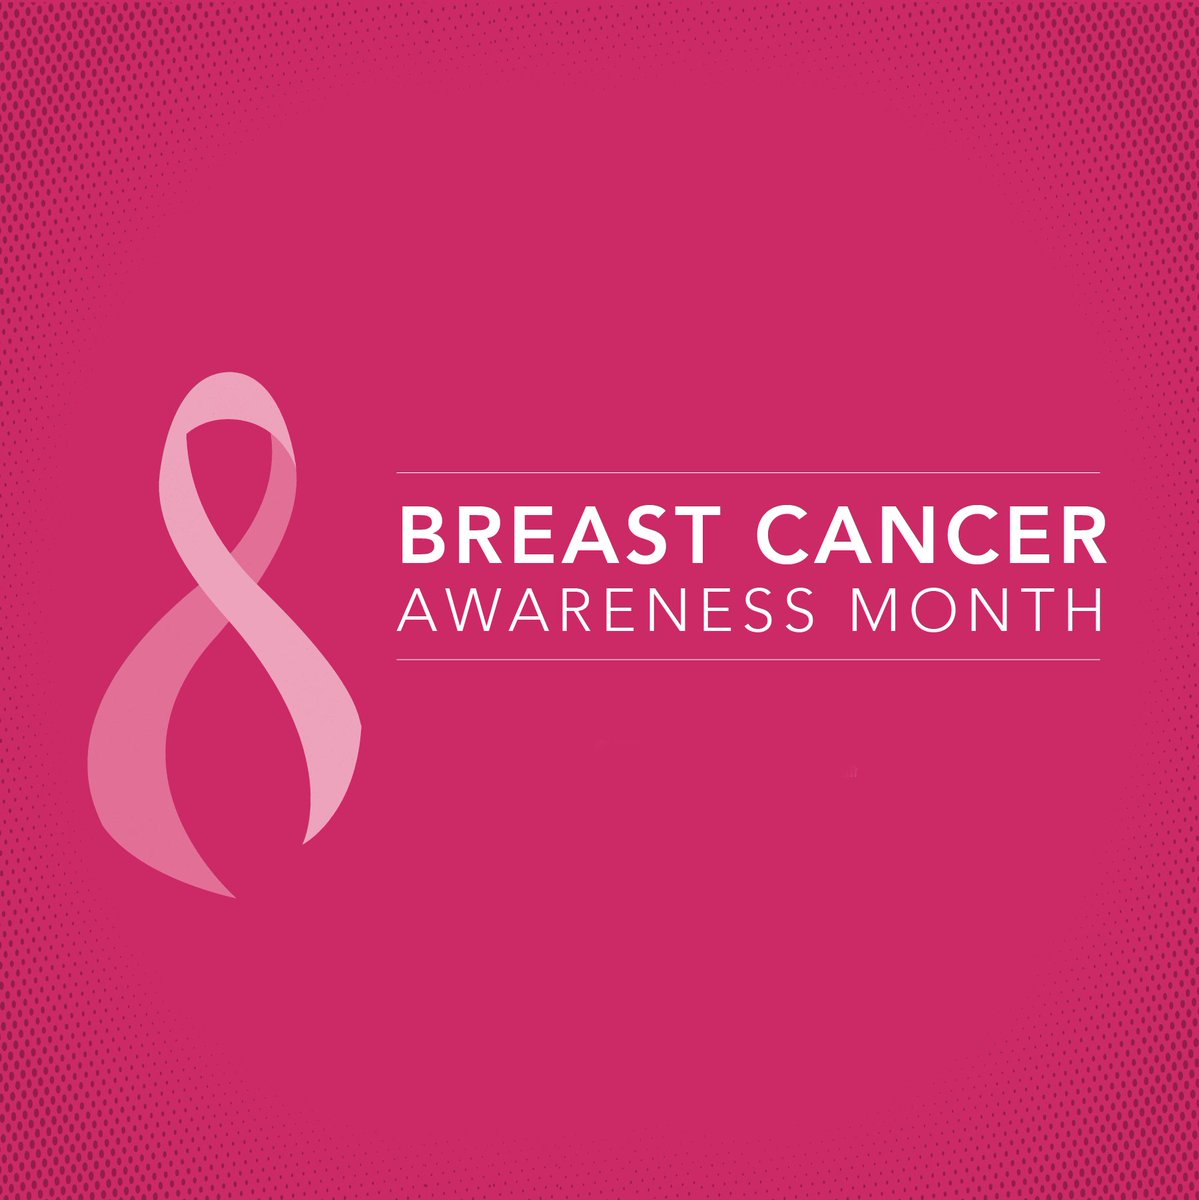 October is #BreastCancerAwarenessMonth, a time to unite in the fight against this devastating disease. Let's stand together to support those affected, raise awareness, and promote early detection. Together, we can make a difference and save lives.